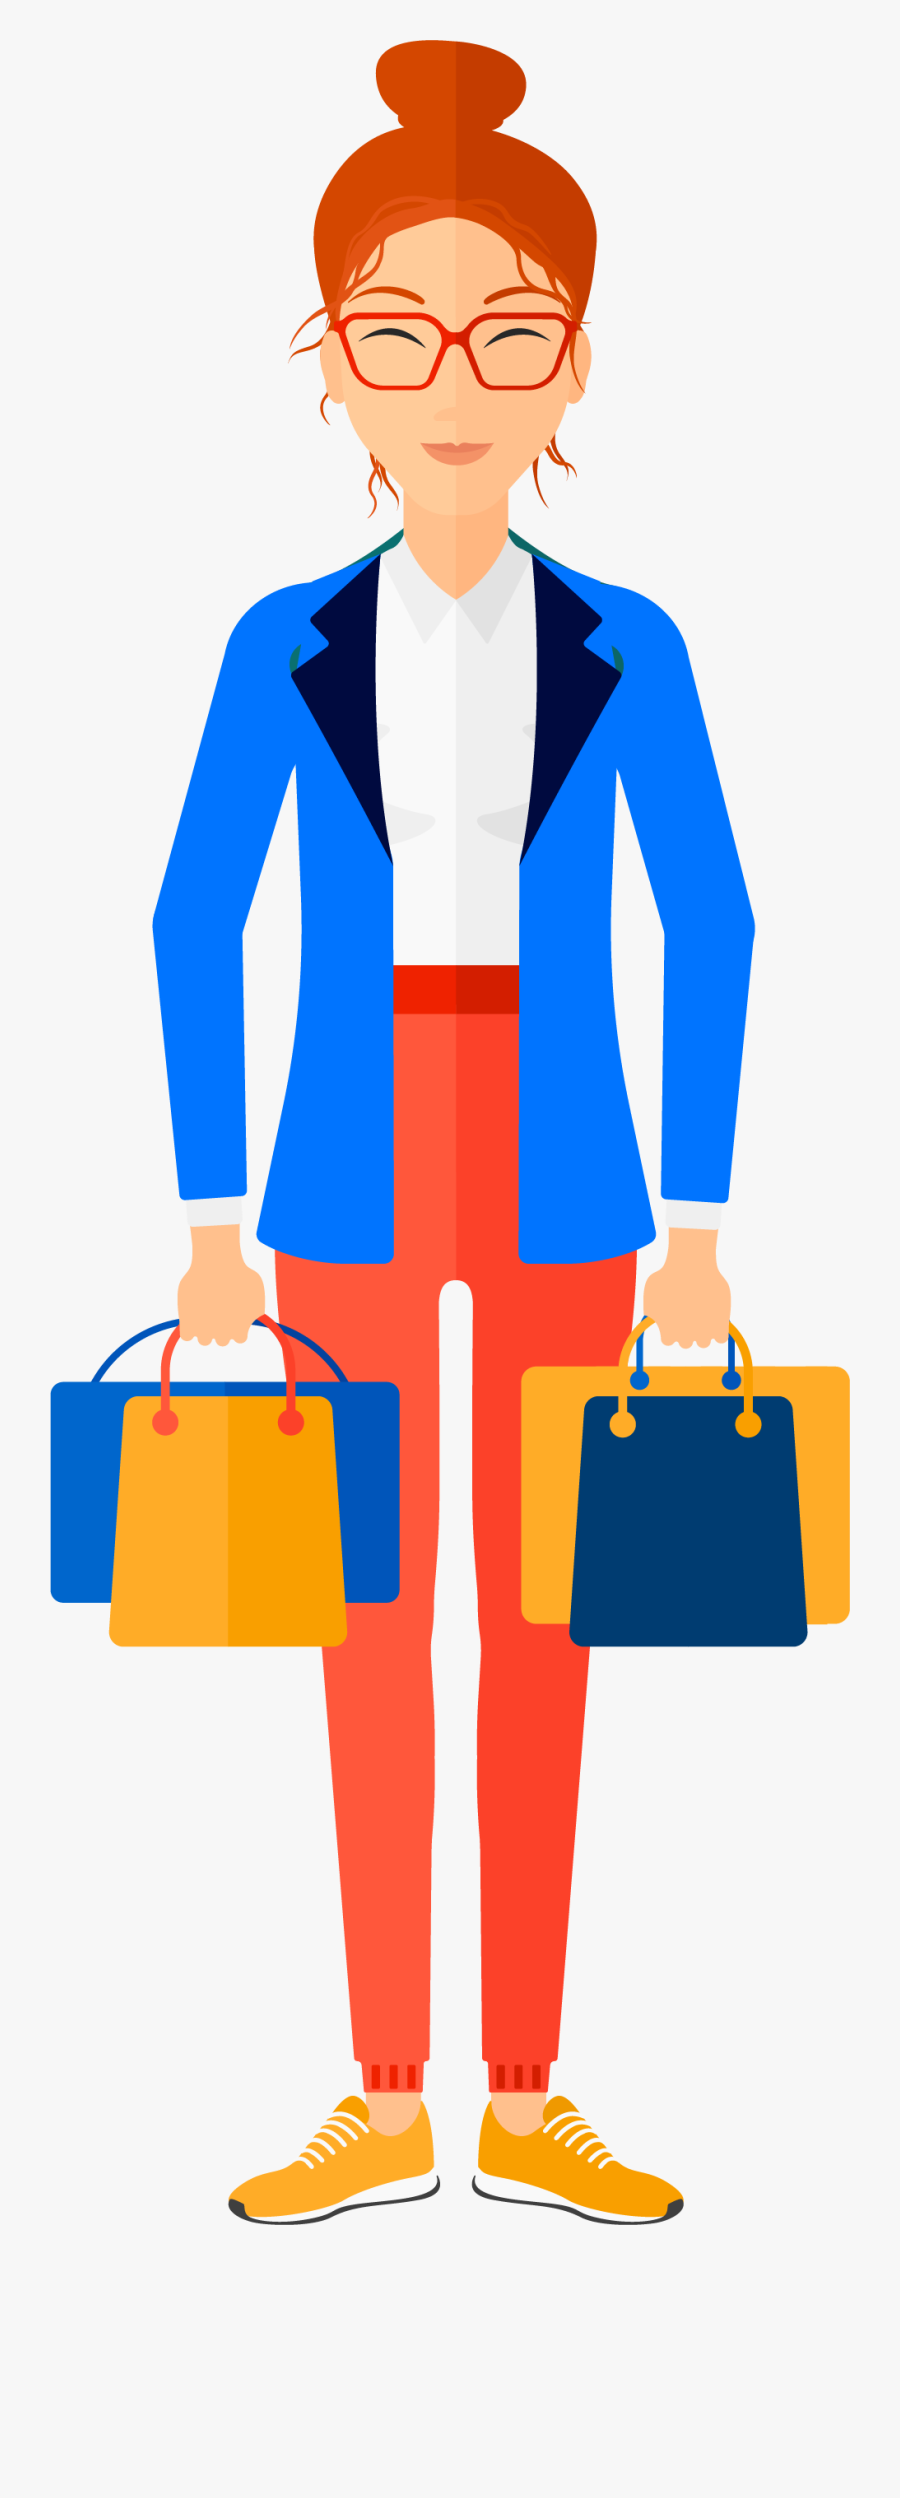 Customer Happy - Shopping Basket With Customer, Transparent Clipart